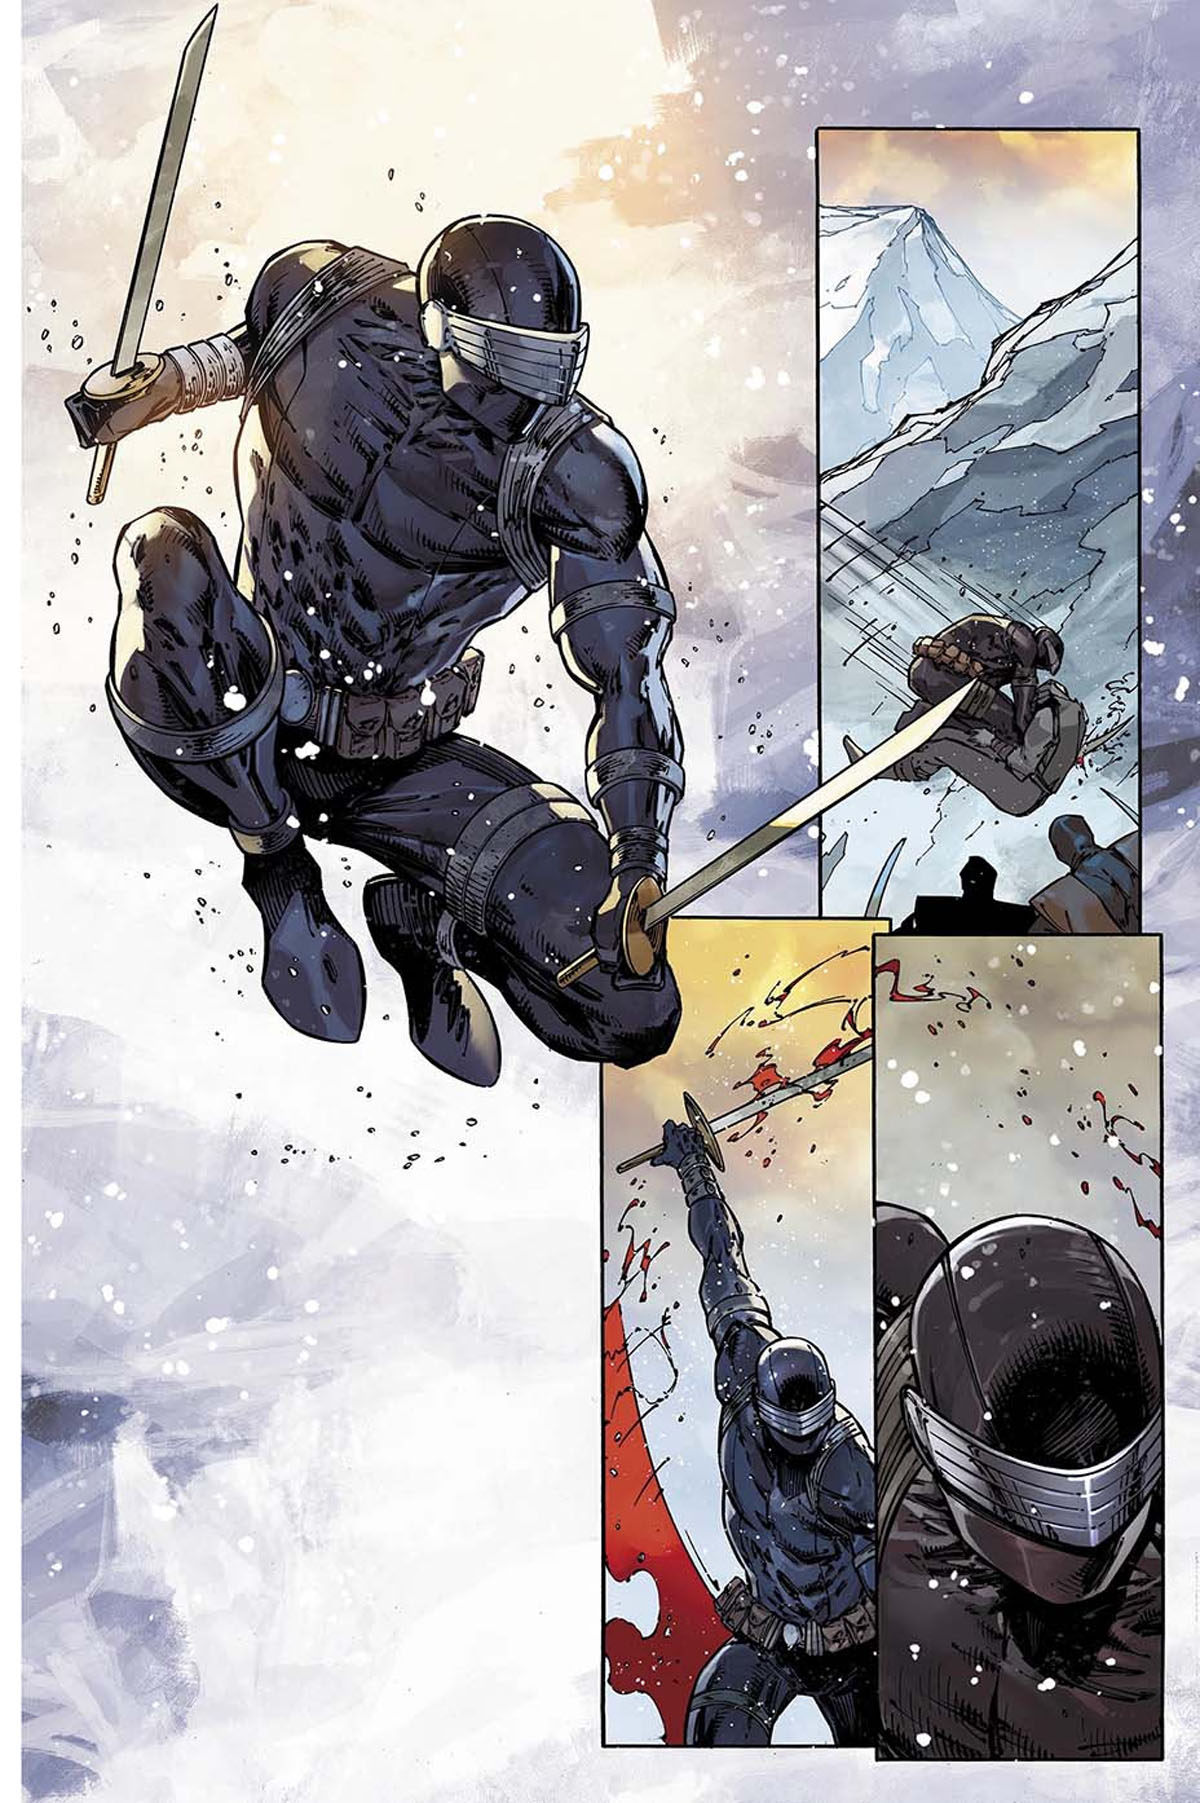 Snake Eyes: Deadgame #1 preview page 3